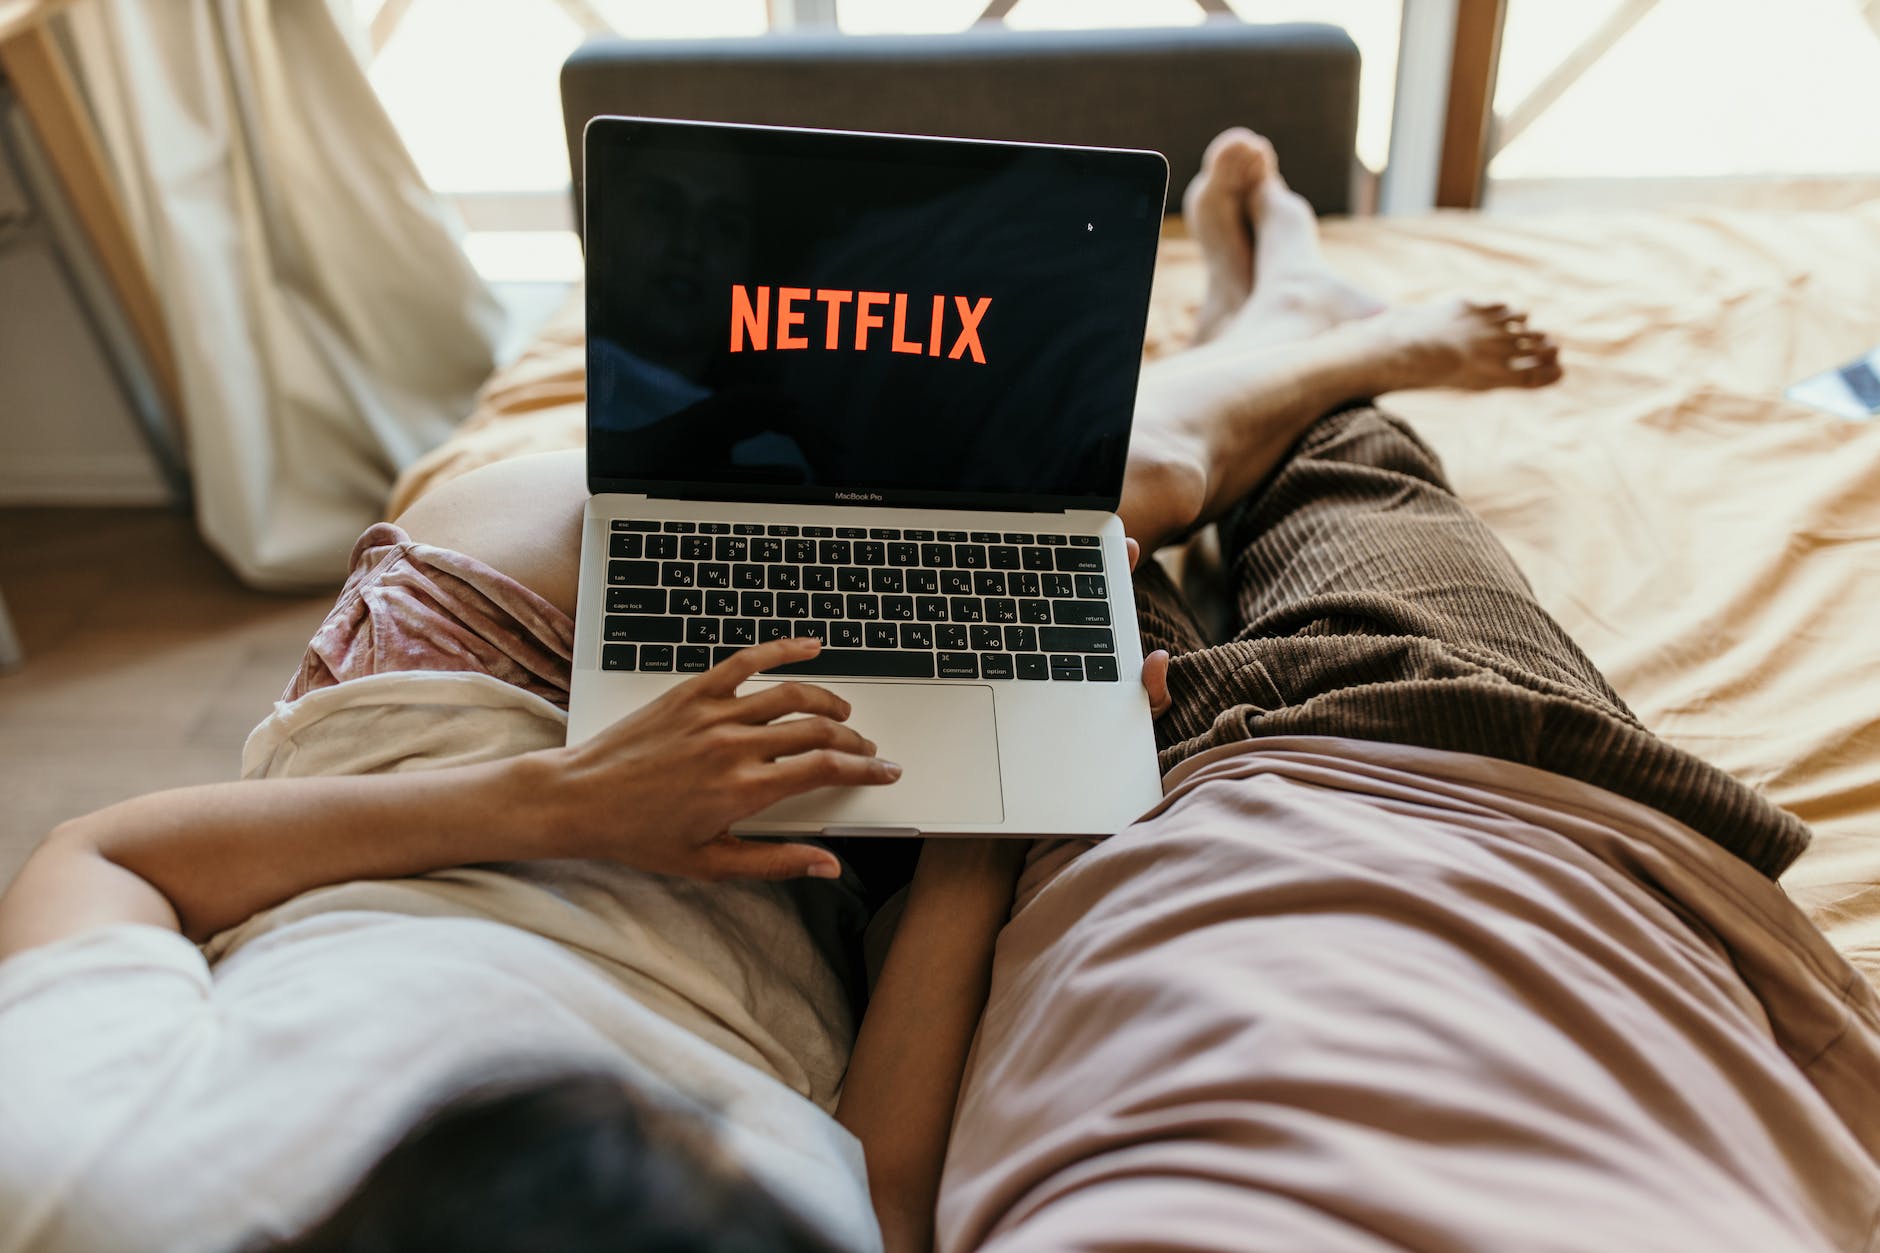 a couple lying on bed watching netflix on a laptop